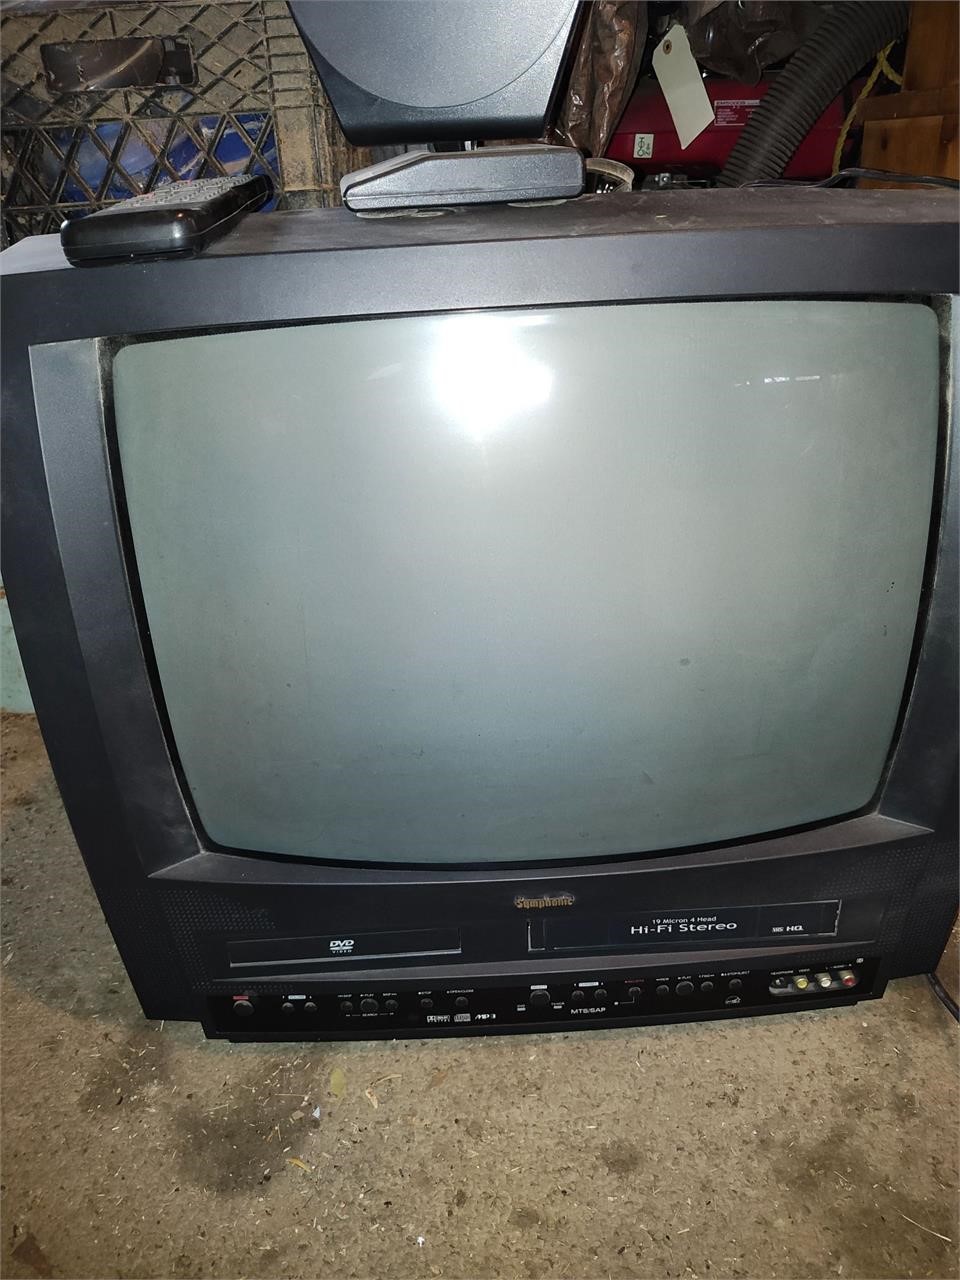 Older TV with DVD player. Working